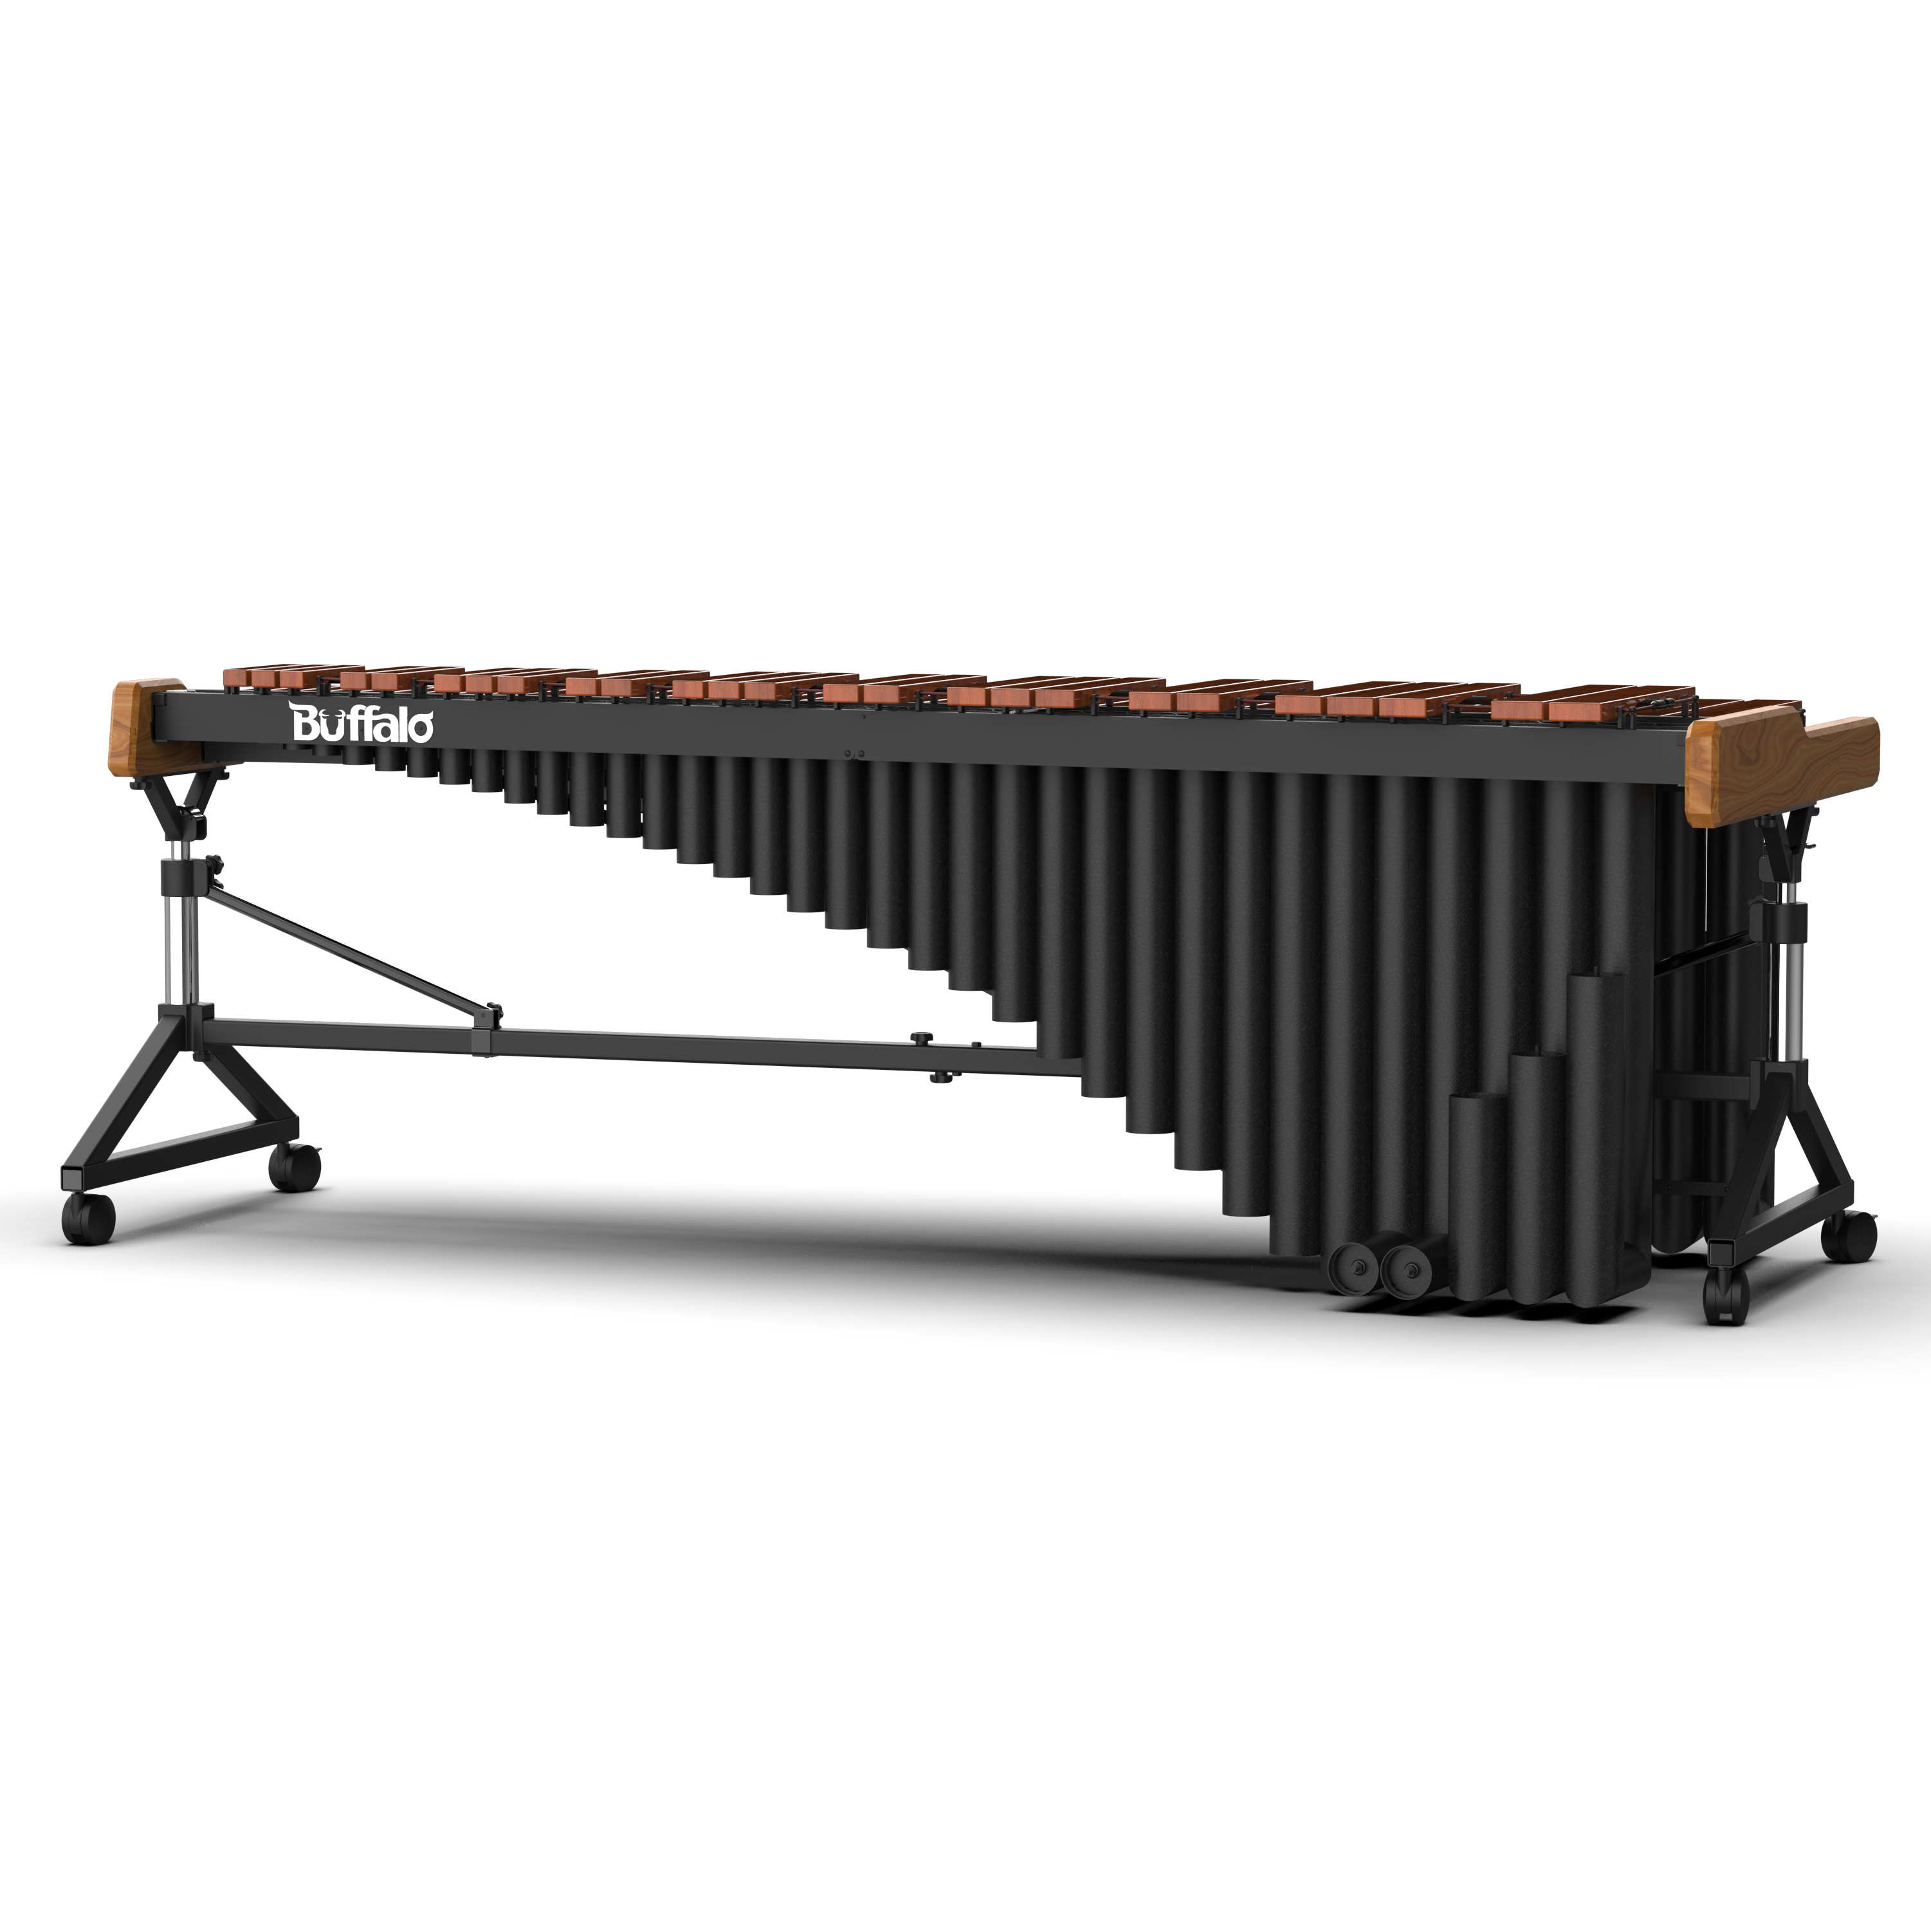 Buffalo Percussion | Marimba, the one you are searching for.